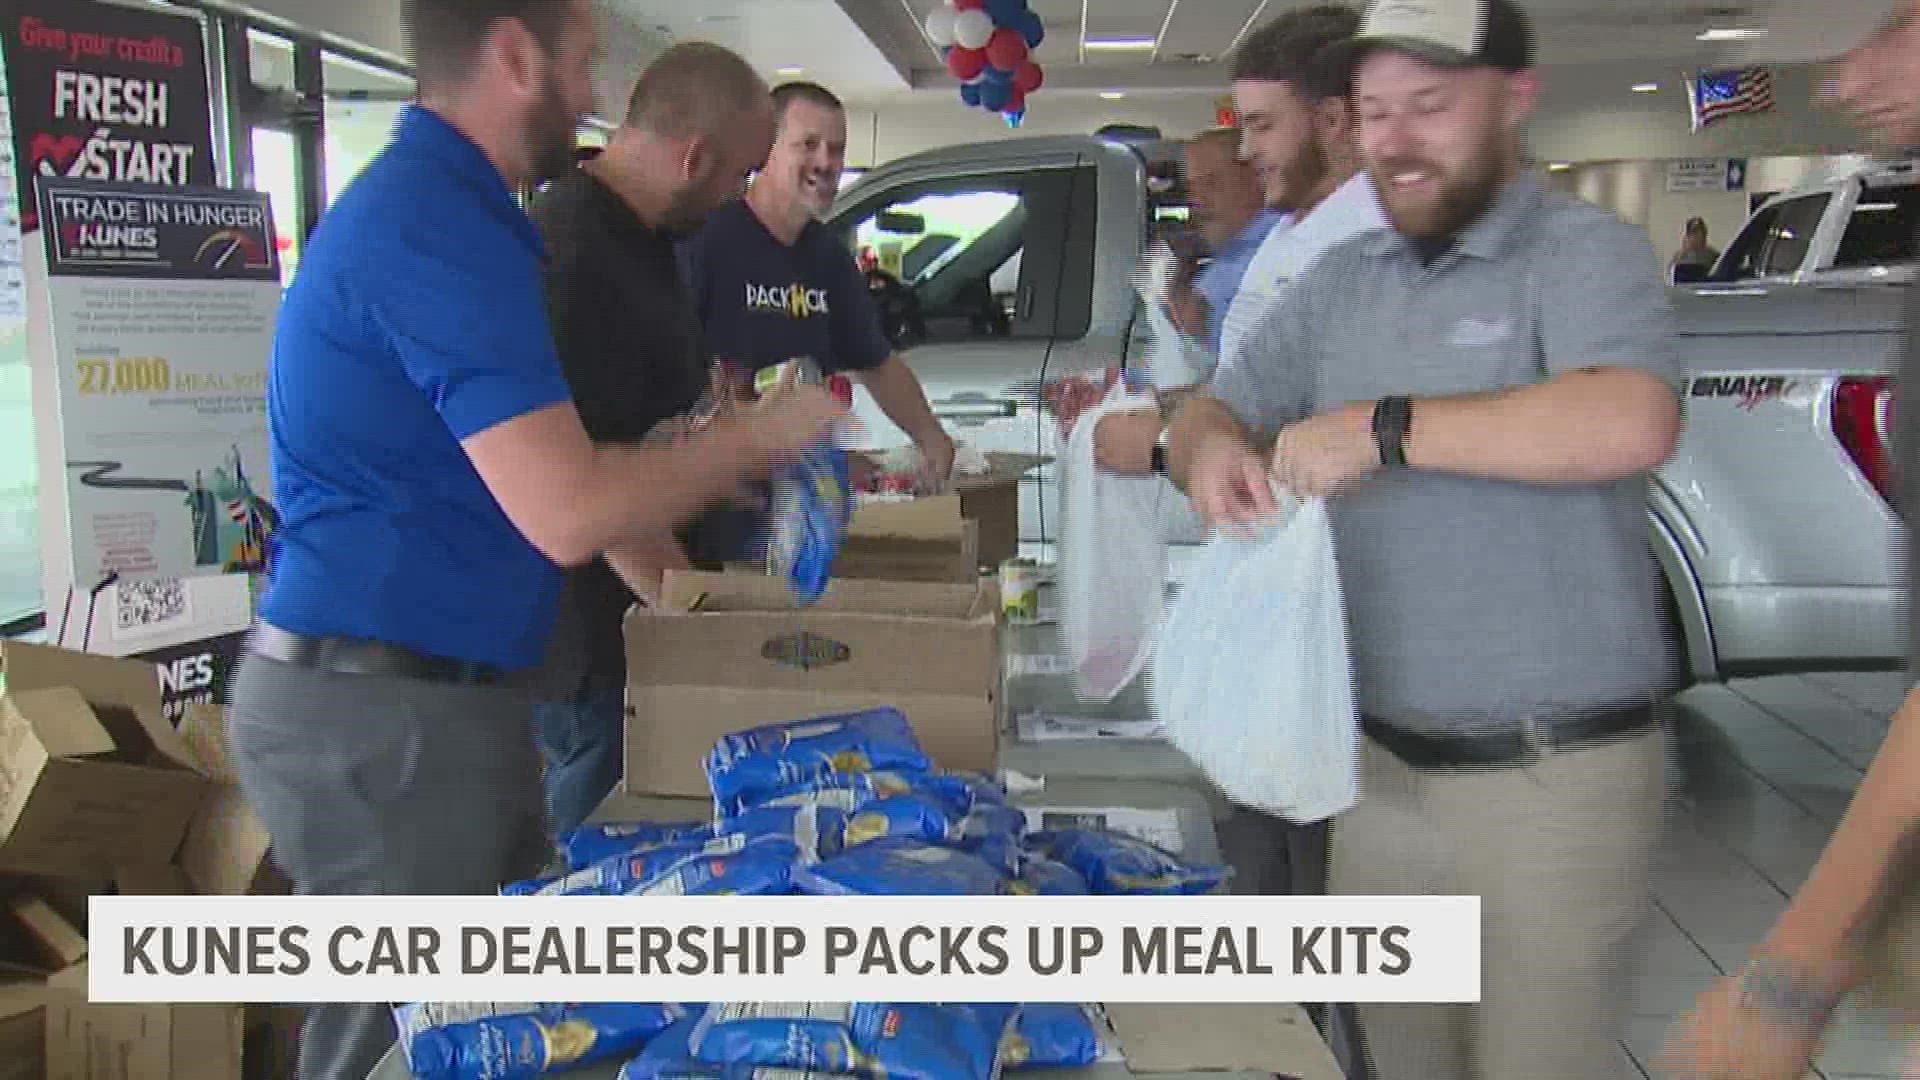 Kunes dealerships in the Quad Cities will donate 576 bags of non-perishable foods to River Bend Food Bank.